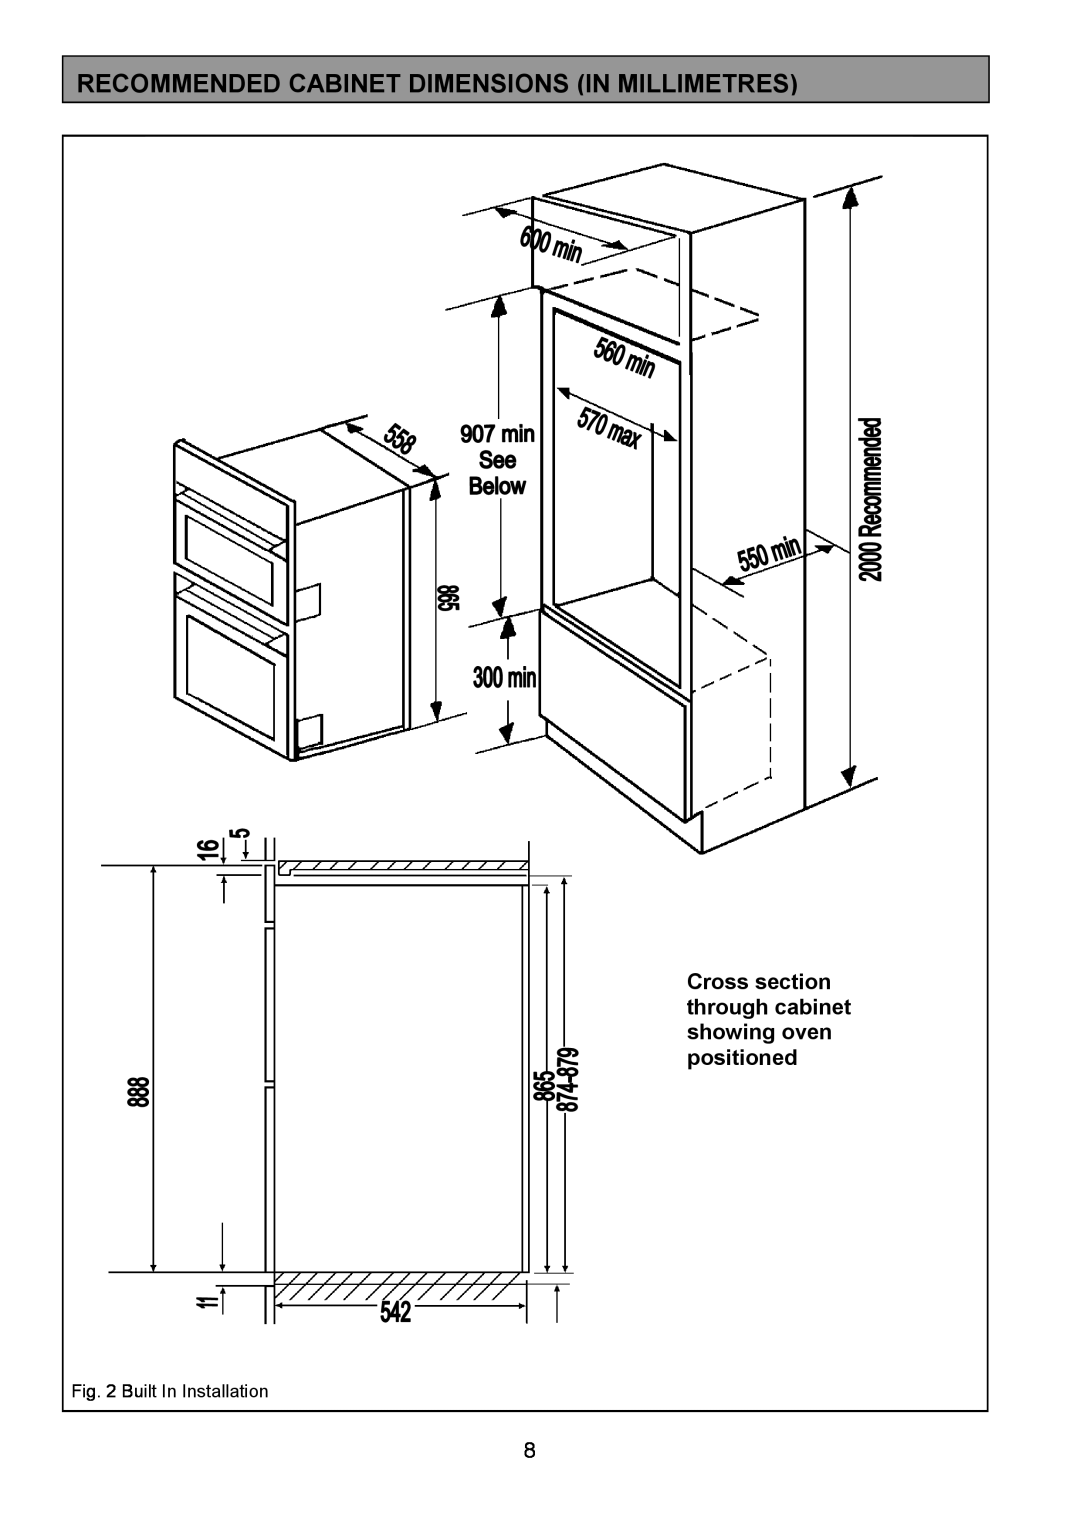 Electrolux EOD6390 manual Recommended Cabinet Dimensions In Millimetres, Built In Installation 